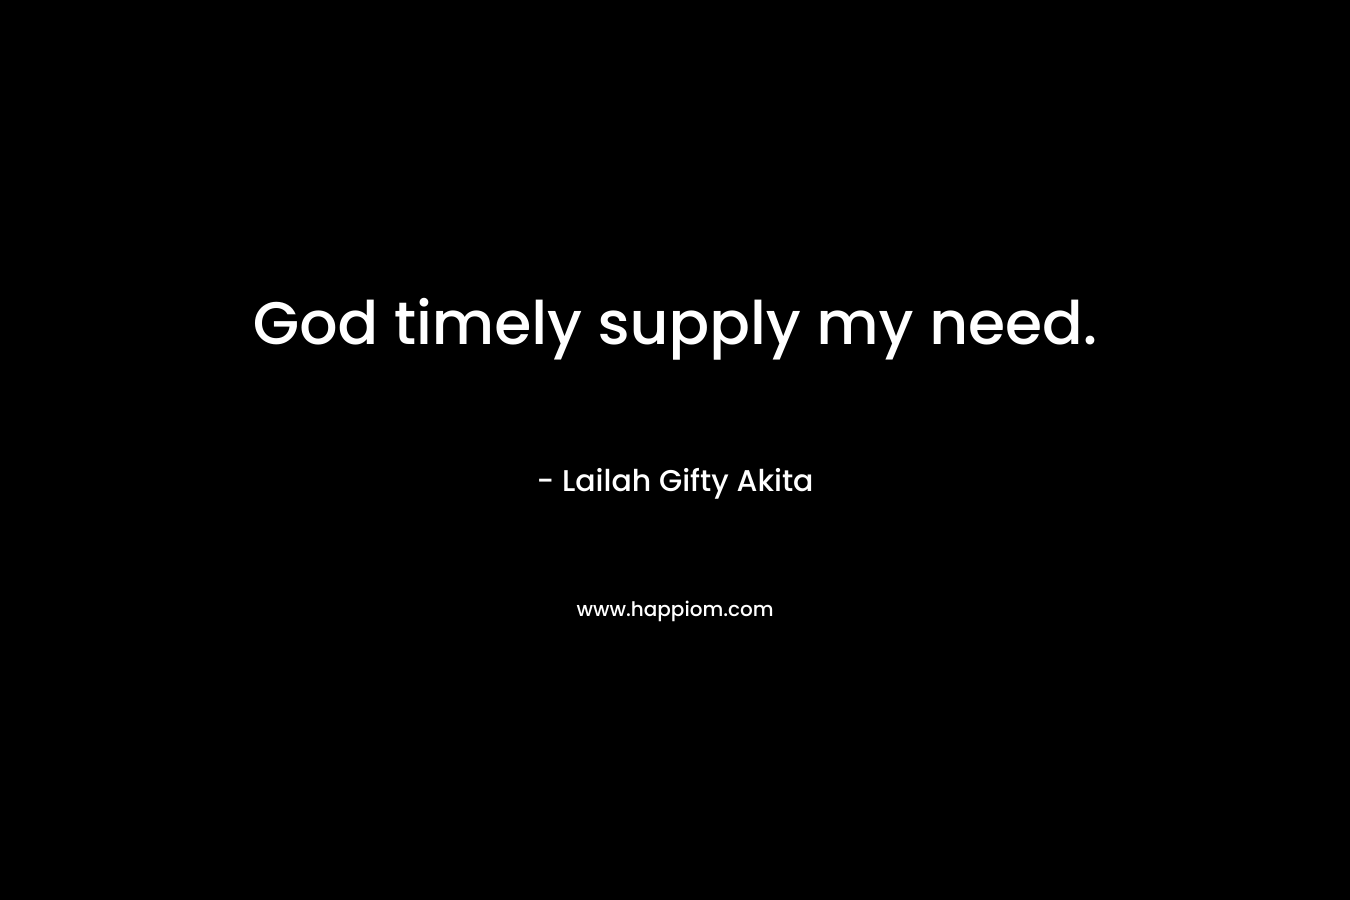 God timely supply my need.